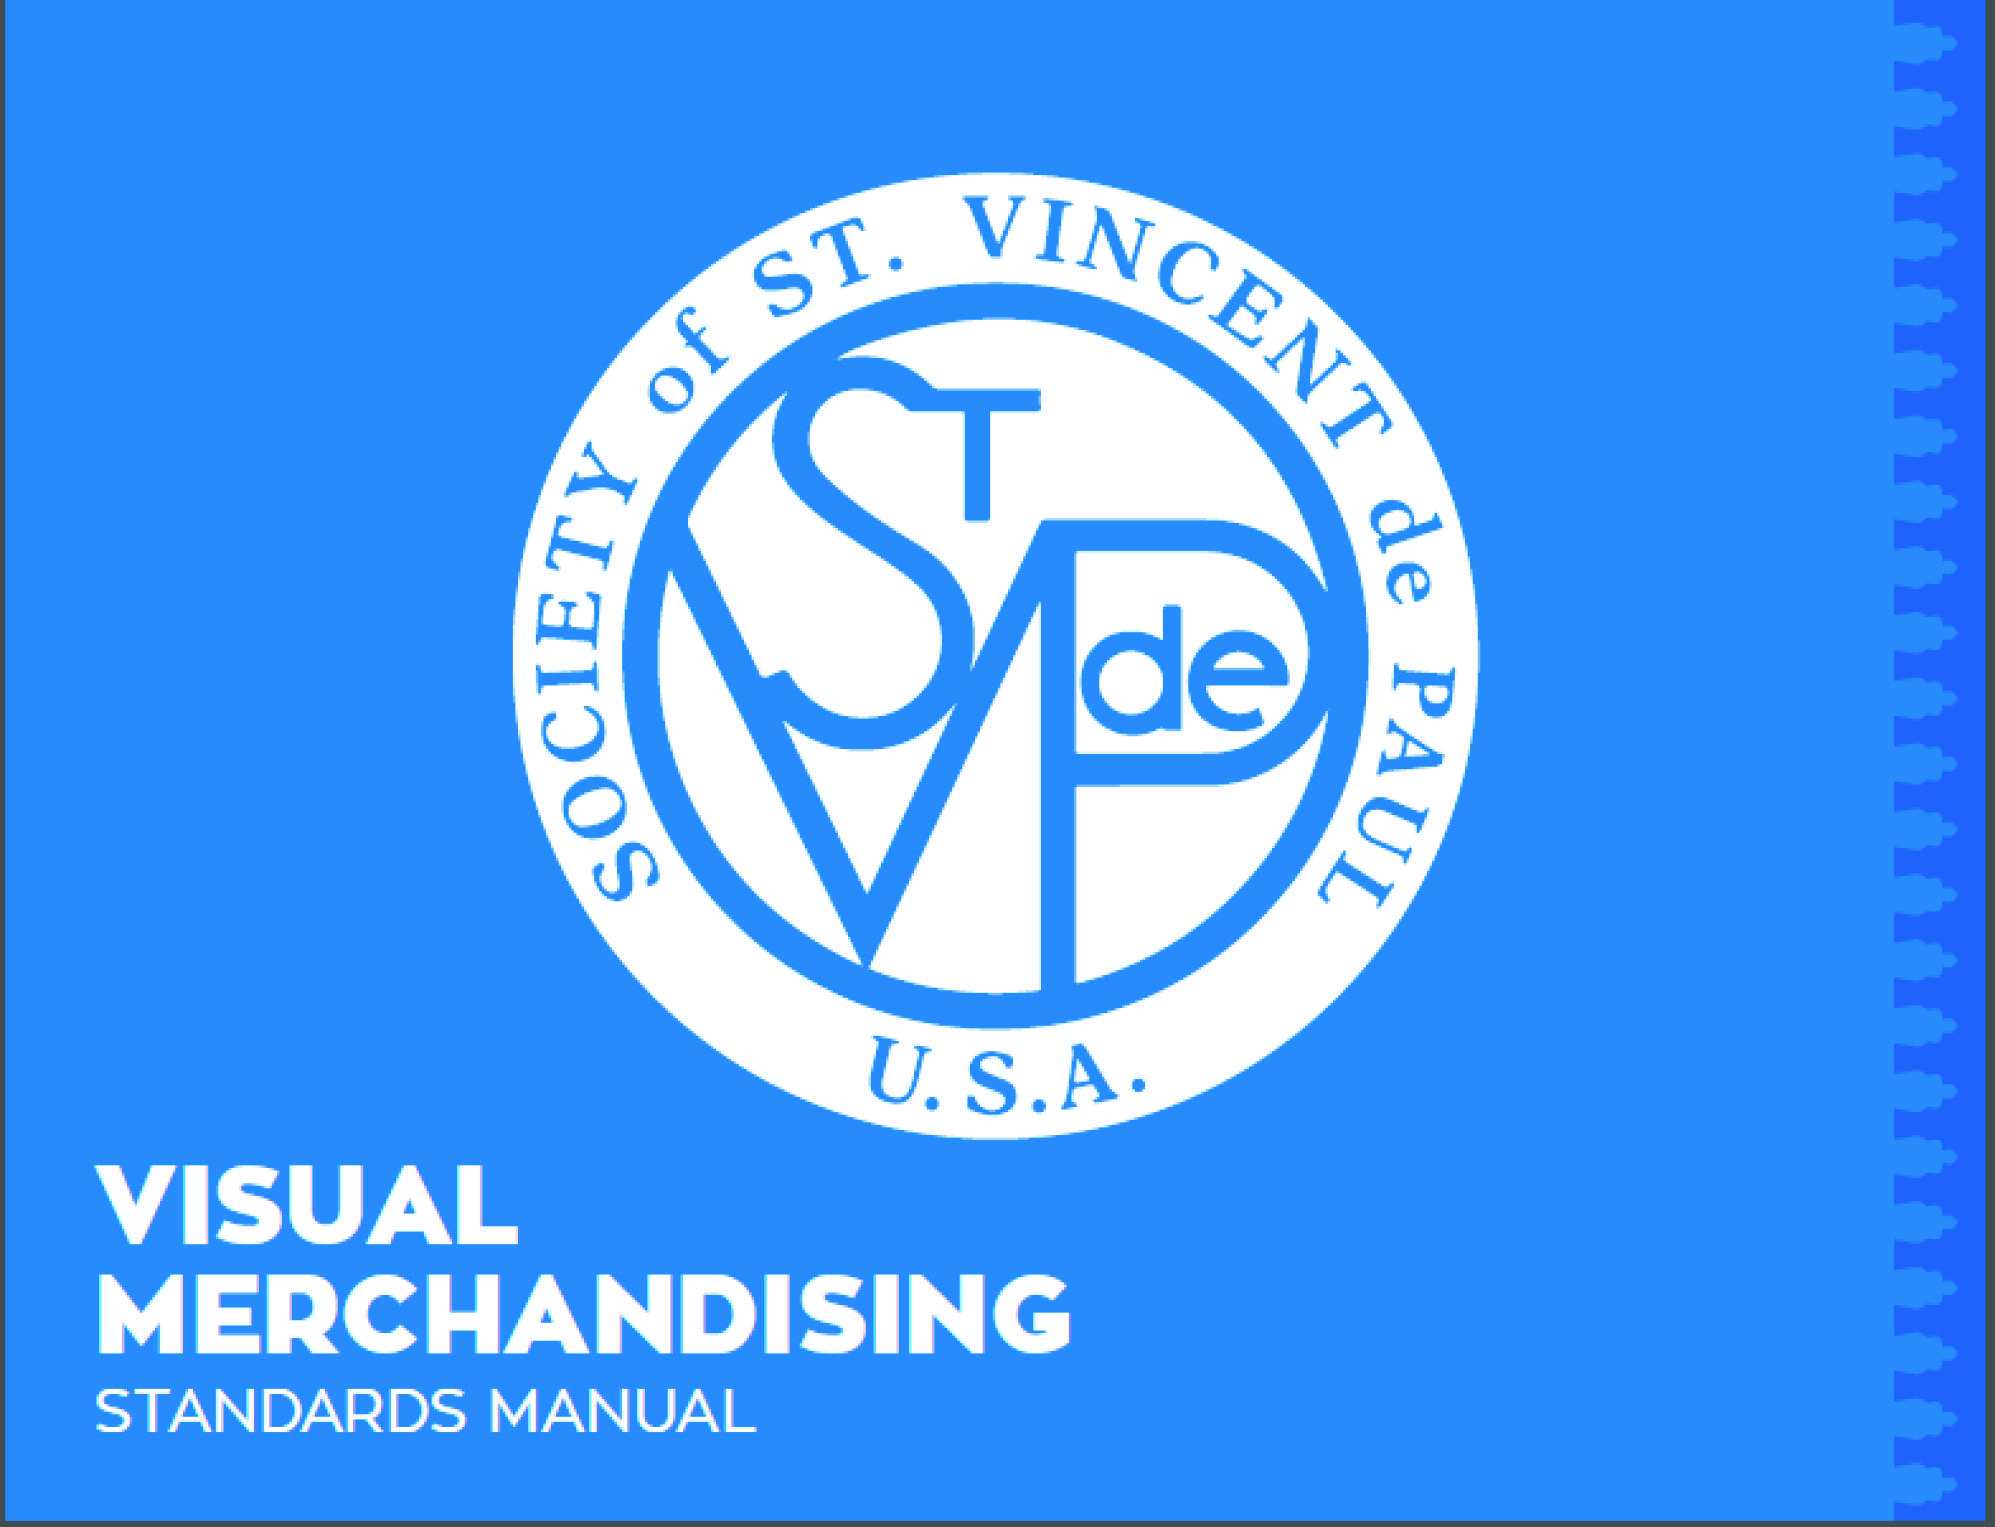 Svdp Logo - Resources, Store Manuals USA Thrift Store